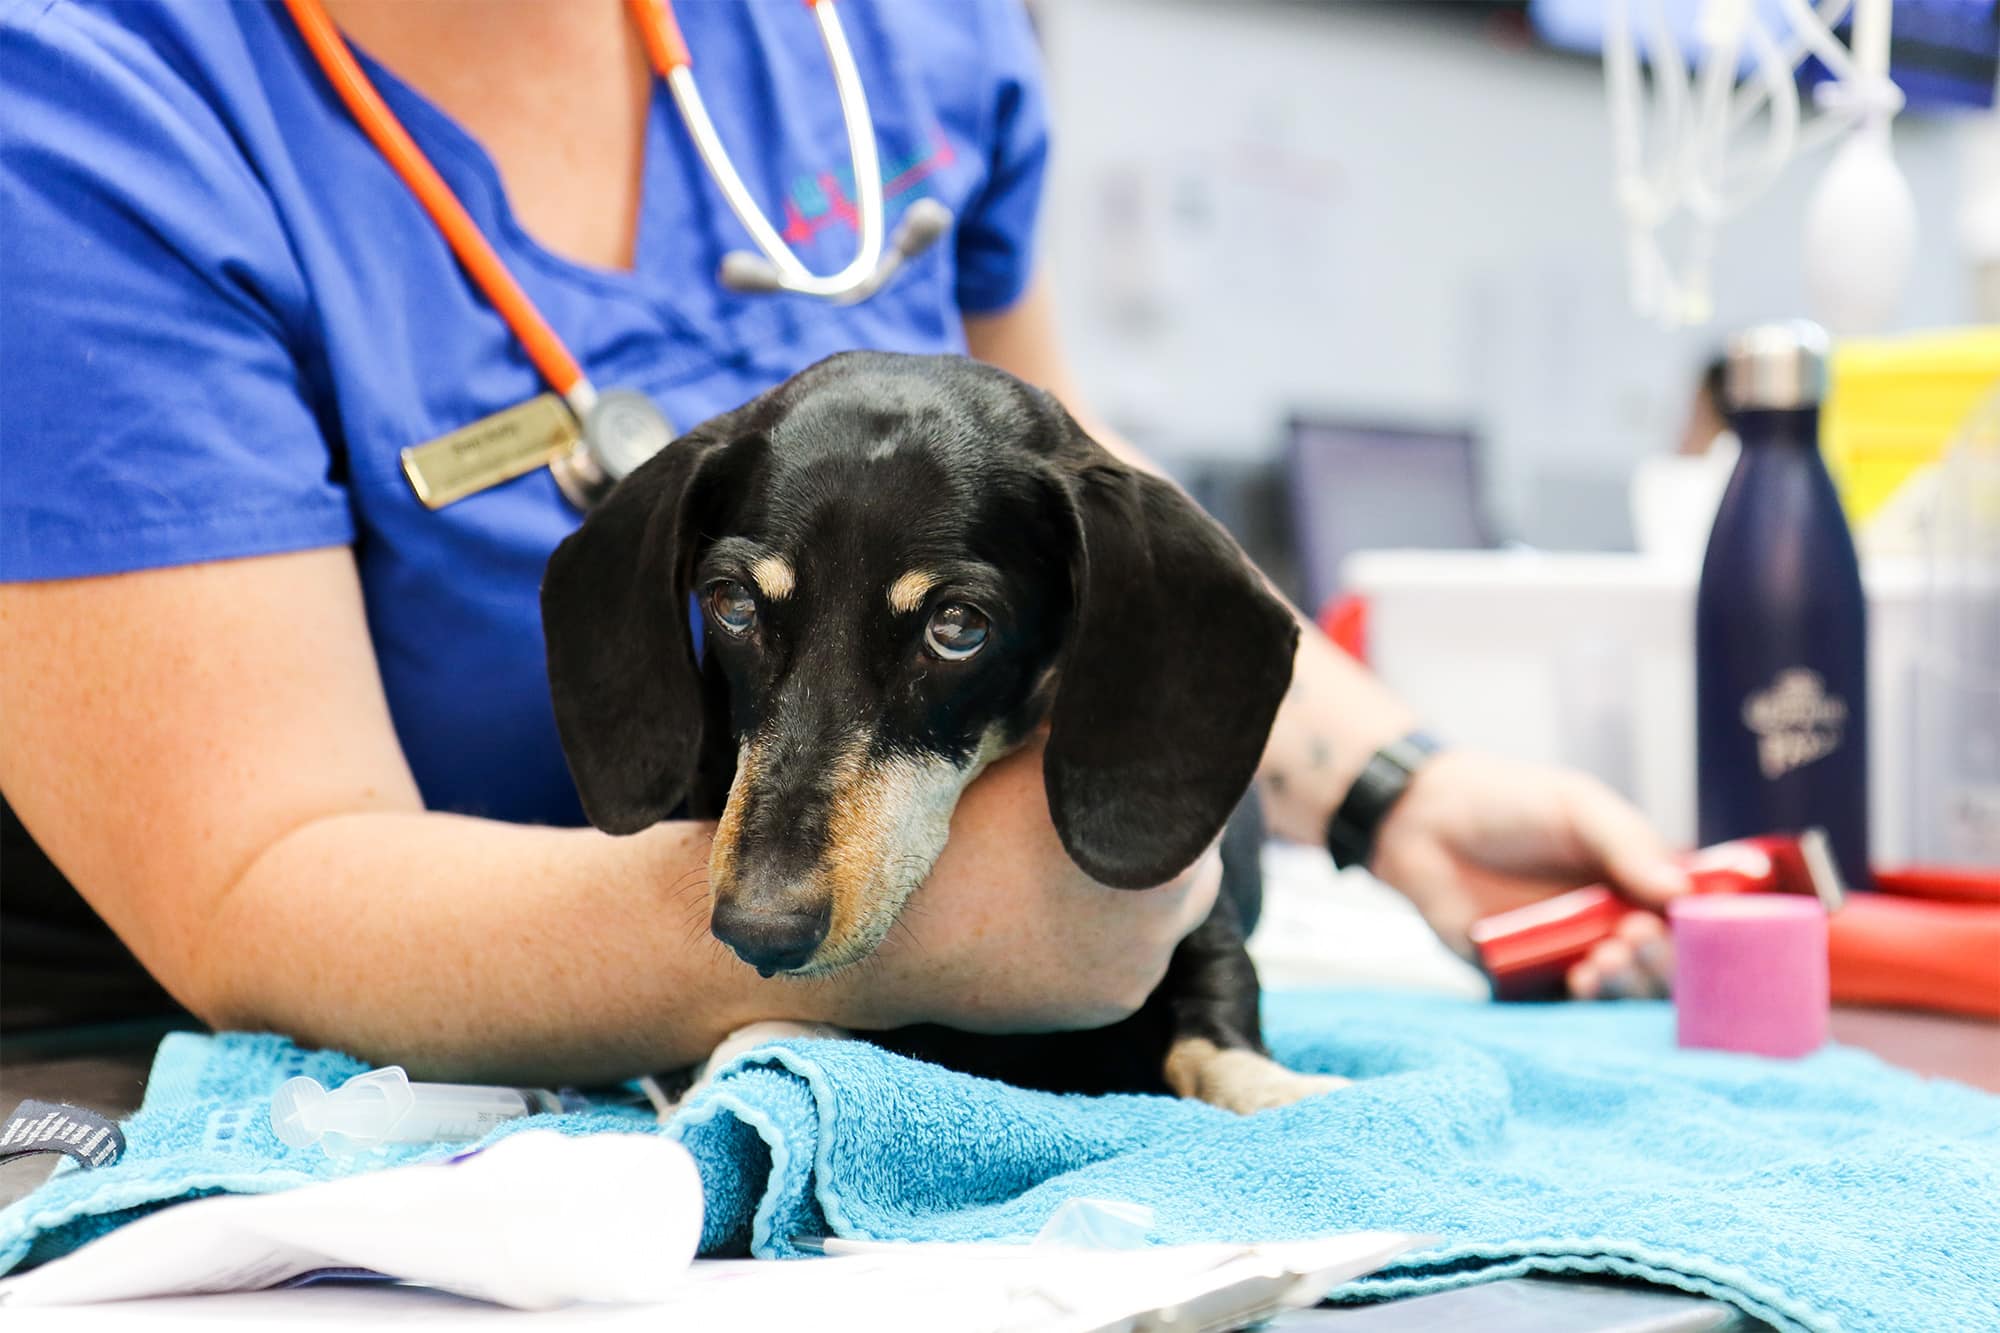 dachshund on the crash bench in the emergency at Animal Emergency Service in Carrara